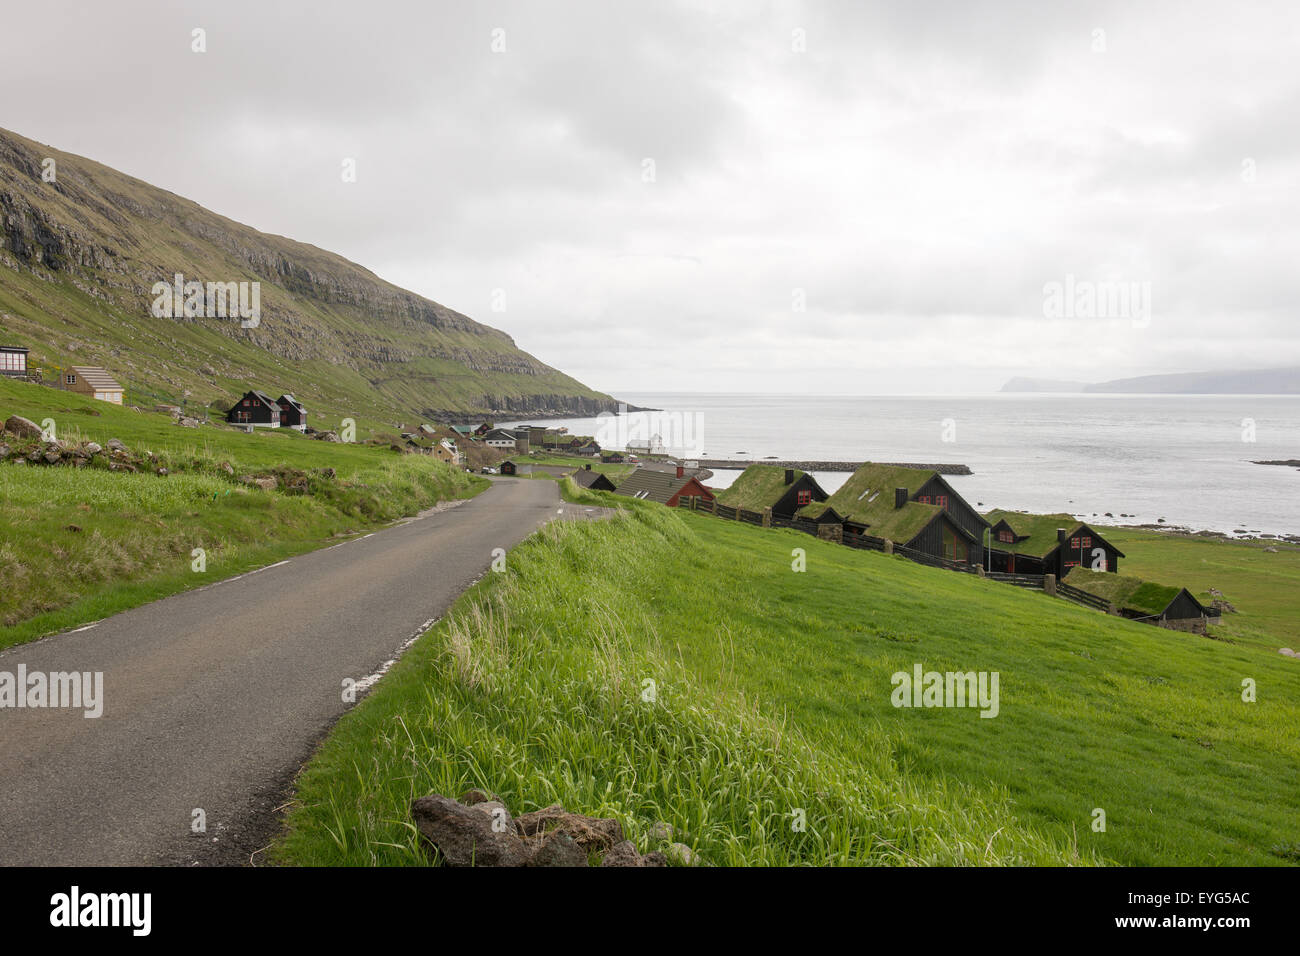 Kirkjubøur on the Faroe Islands with typical houses, church and road Stock Photo